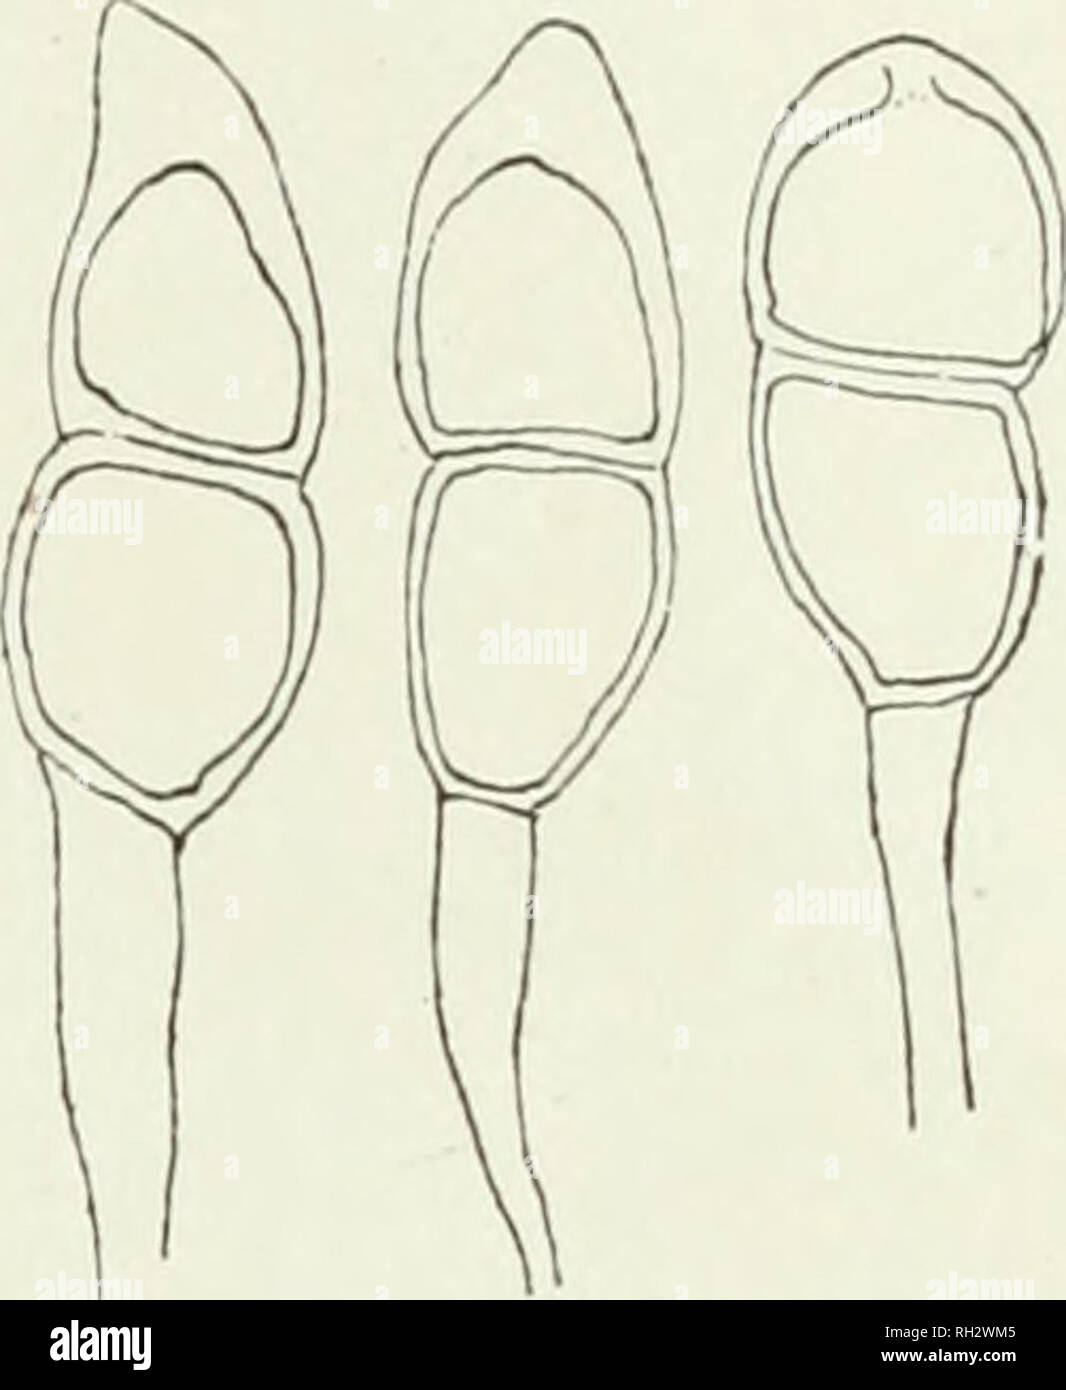 . The British rust fungi (Uredinales), their biology and classification. Uredineae. ON LABIATE 175 met with, viz. spores with three or more cells variously arranged. See Grove, Gardener's Chronicle, xxiv (1885), p. 180, f. 38. The mycelium is probably perennial. Distribution : Central and Western Europe. 47. Puccinia annularis Schlecht. Uredo annularis Strauss in Wetter. Ann. ii. 106. Puccinia anmdaris Schlecht. Flor. Berol. ii. 132 (1824). Plowr. Ured. p. 217. Sacc. Syll. vii. 689. Sydow, Monogr. i. 300. Fischer, Ured. Schweiz, p. 329, f. 240. P. Scorodoniae Link. Spec. ii. 72 (1825). Cooke,  Stock Photo